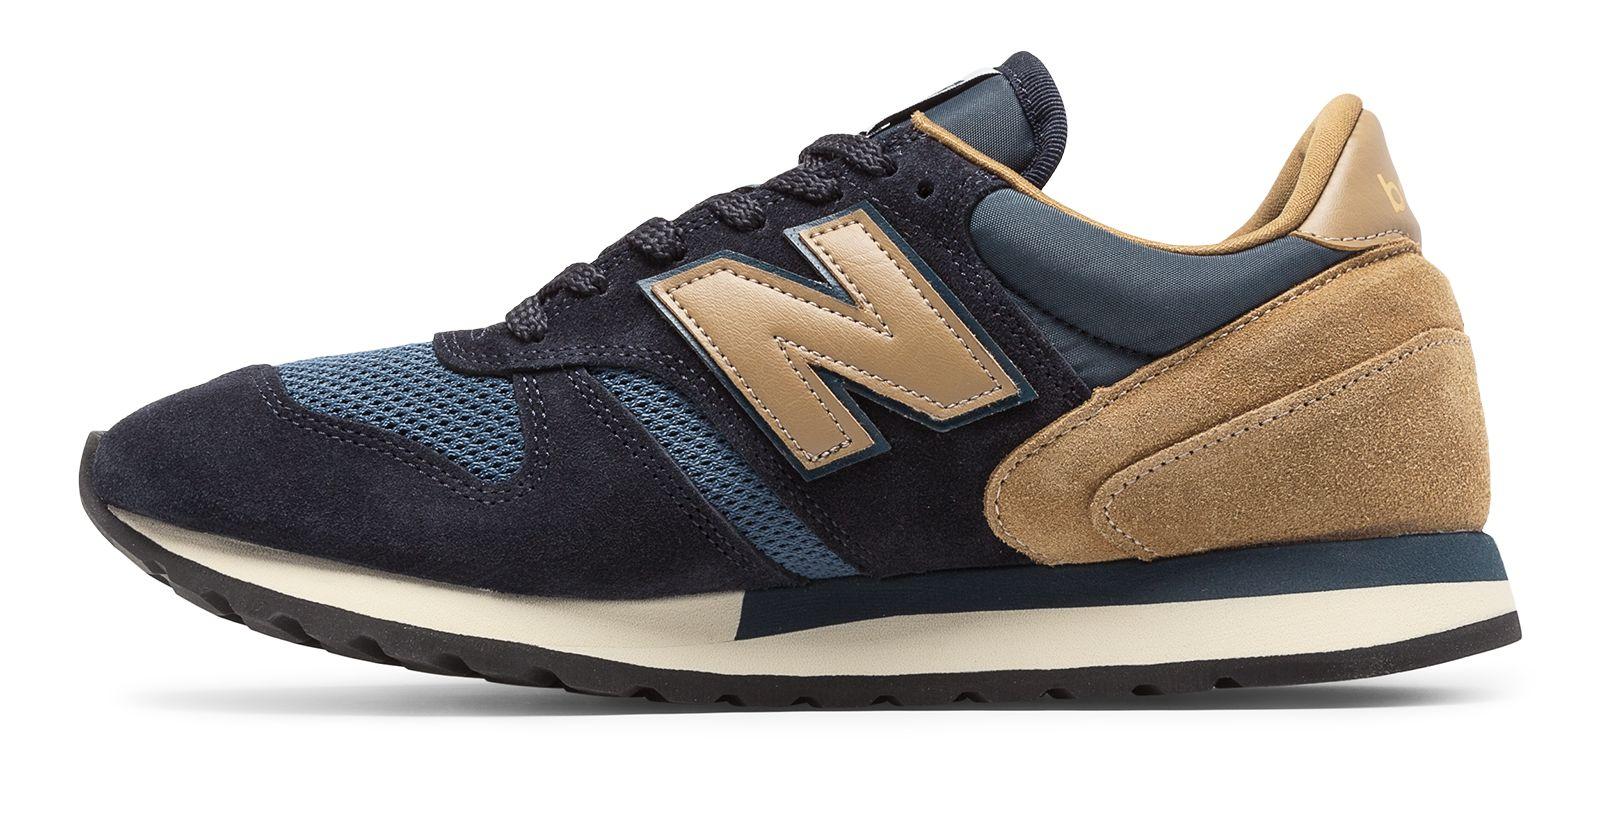 New Balance 770 Made In Uk Suede in Blue for Men - Lyst